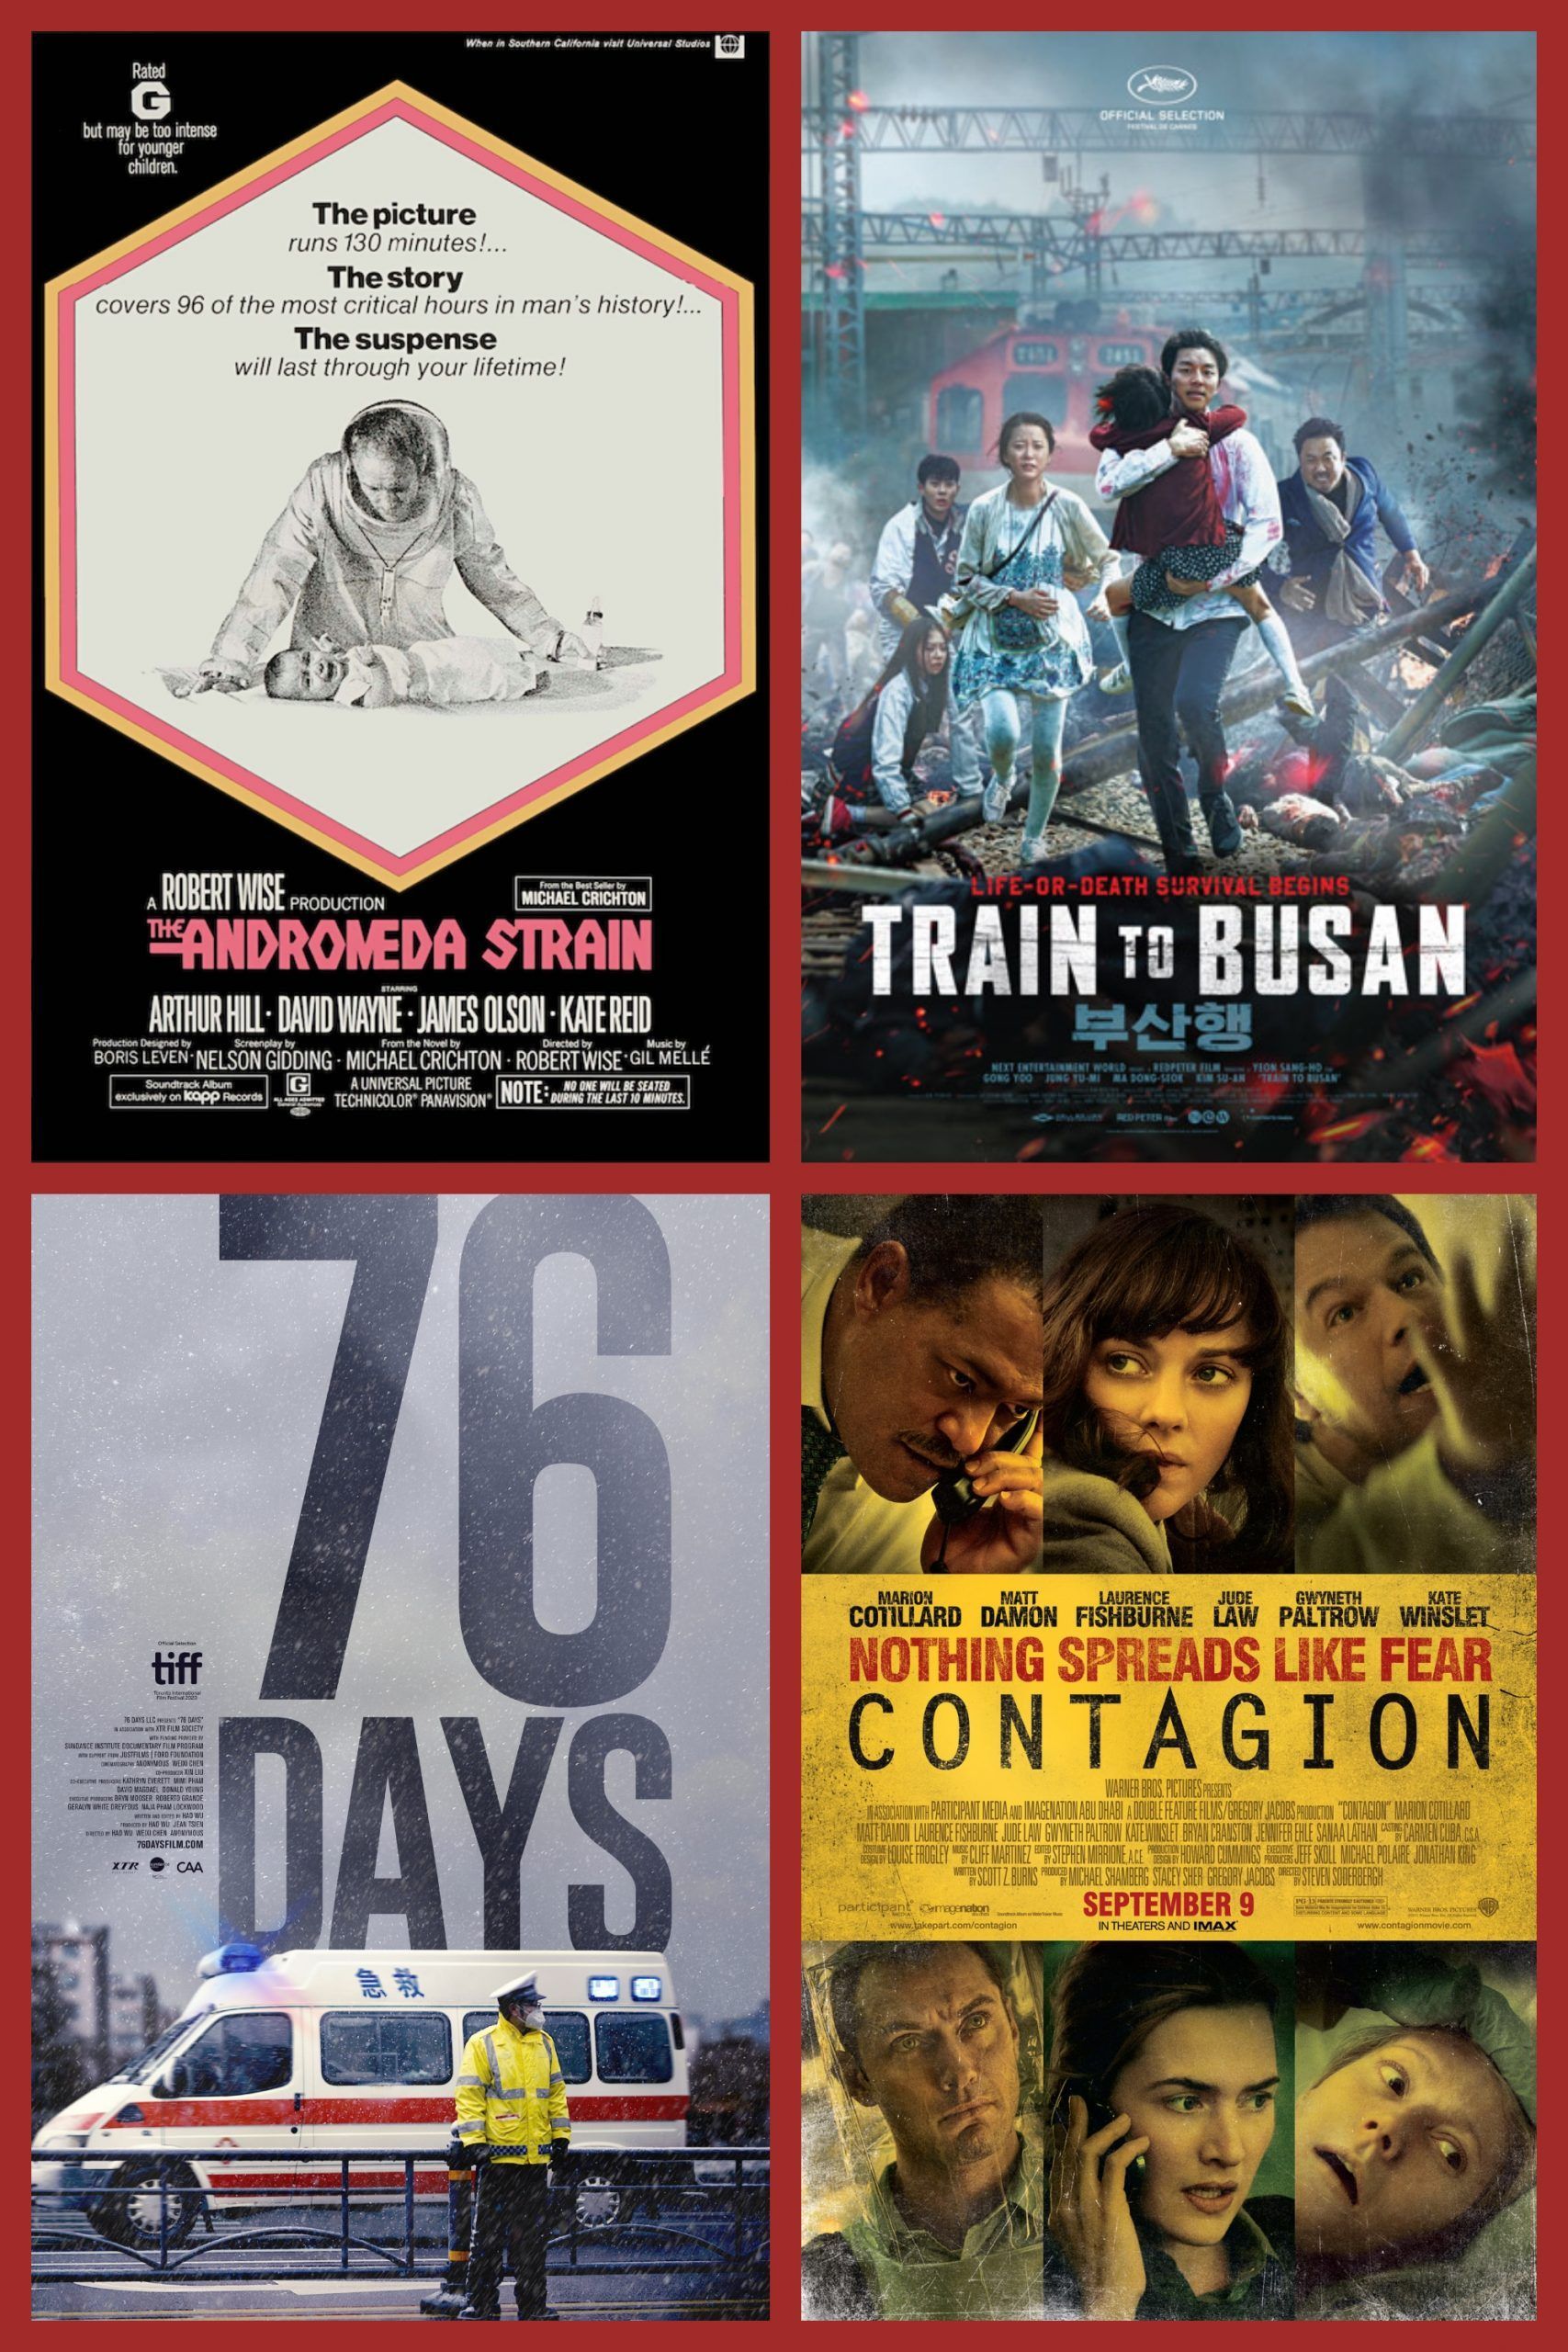 Viruses on Film: From the Pandemic Procedural to the Lockdown Comedy to the Activist Documentary